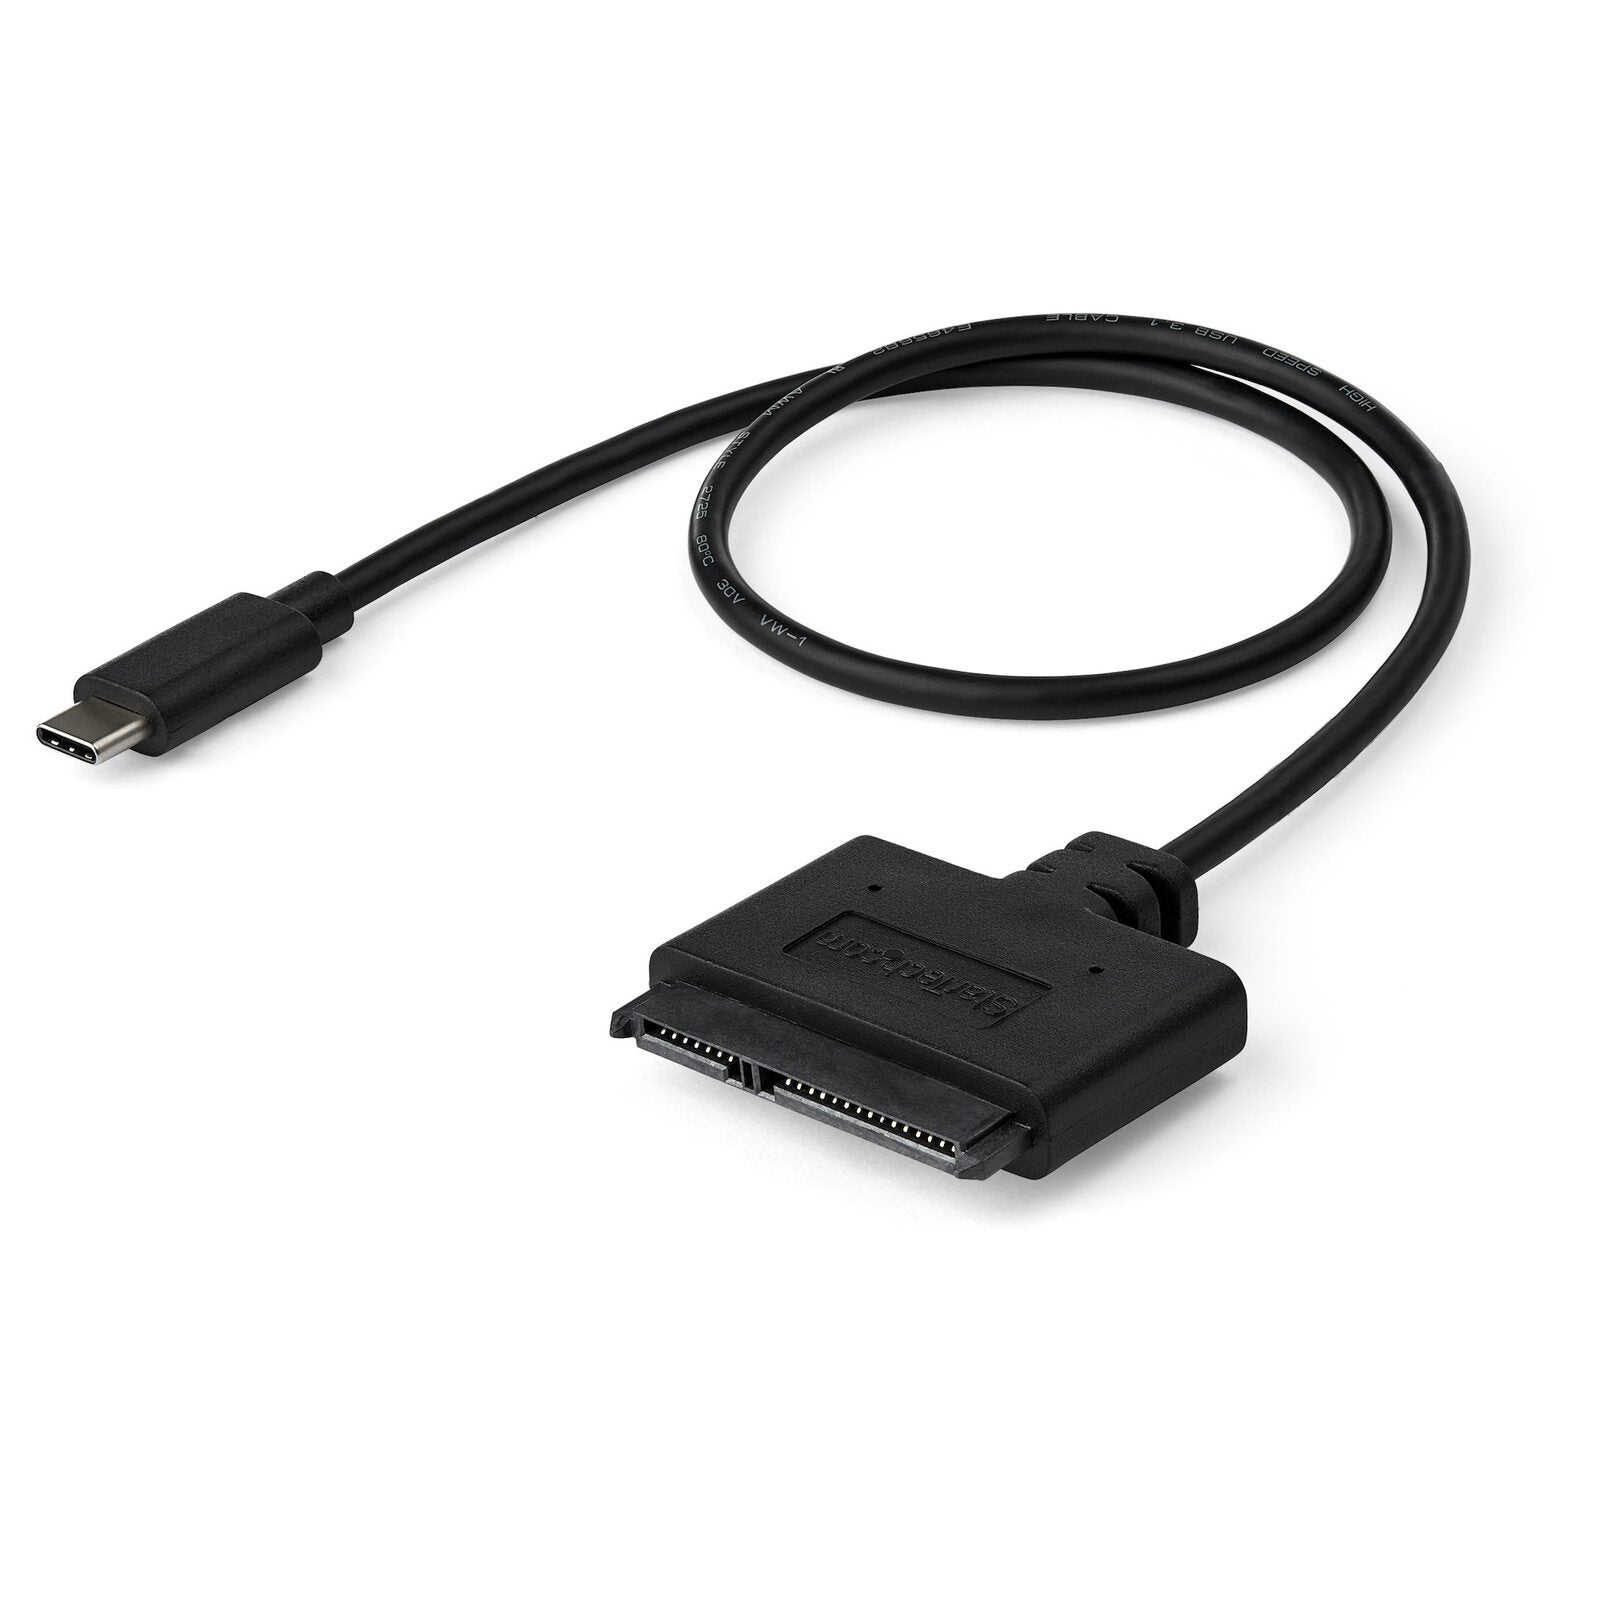 Star Tech 10Gbps USB-C 3.1 to SATA Adapter Transfer Cable for 2.5" SSD/HDD Drive